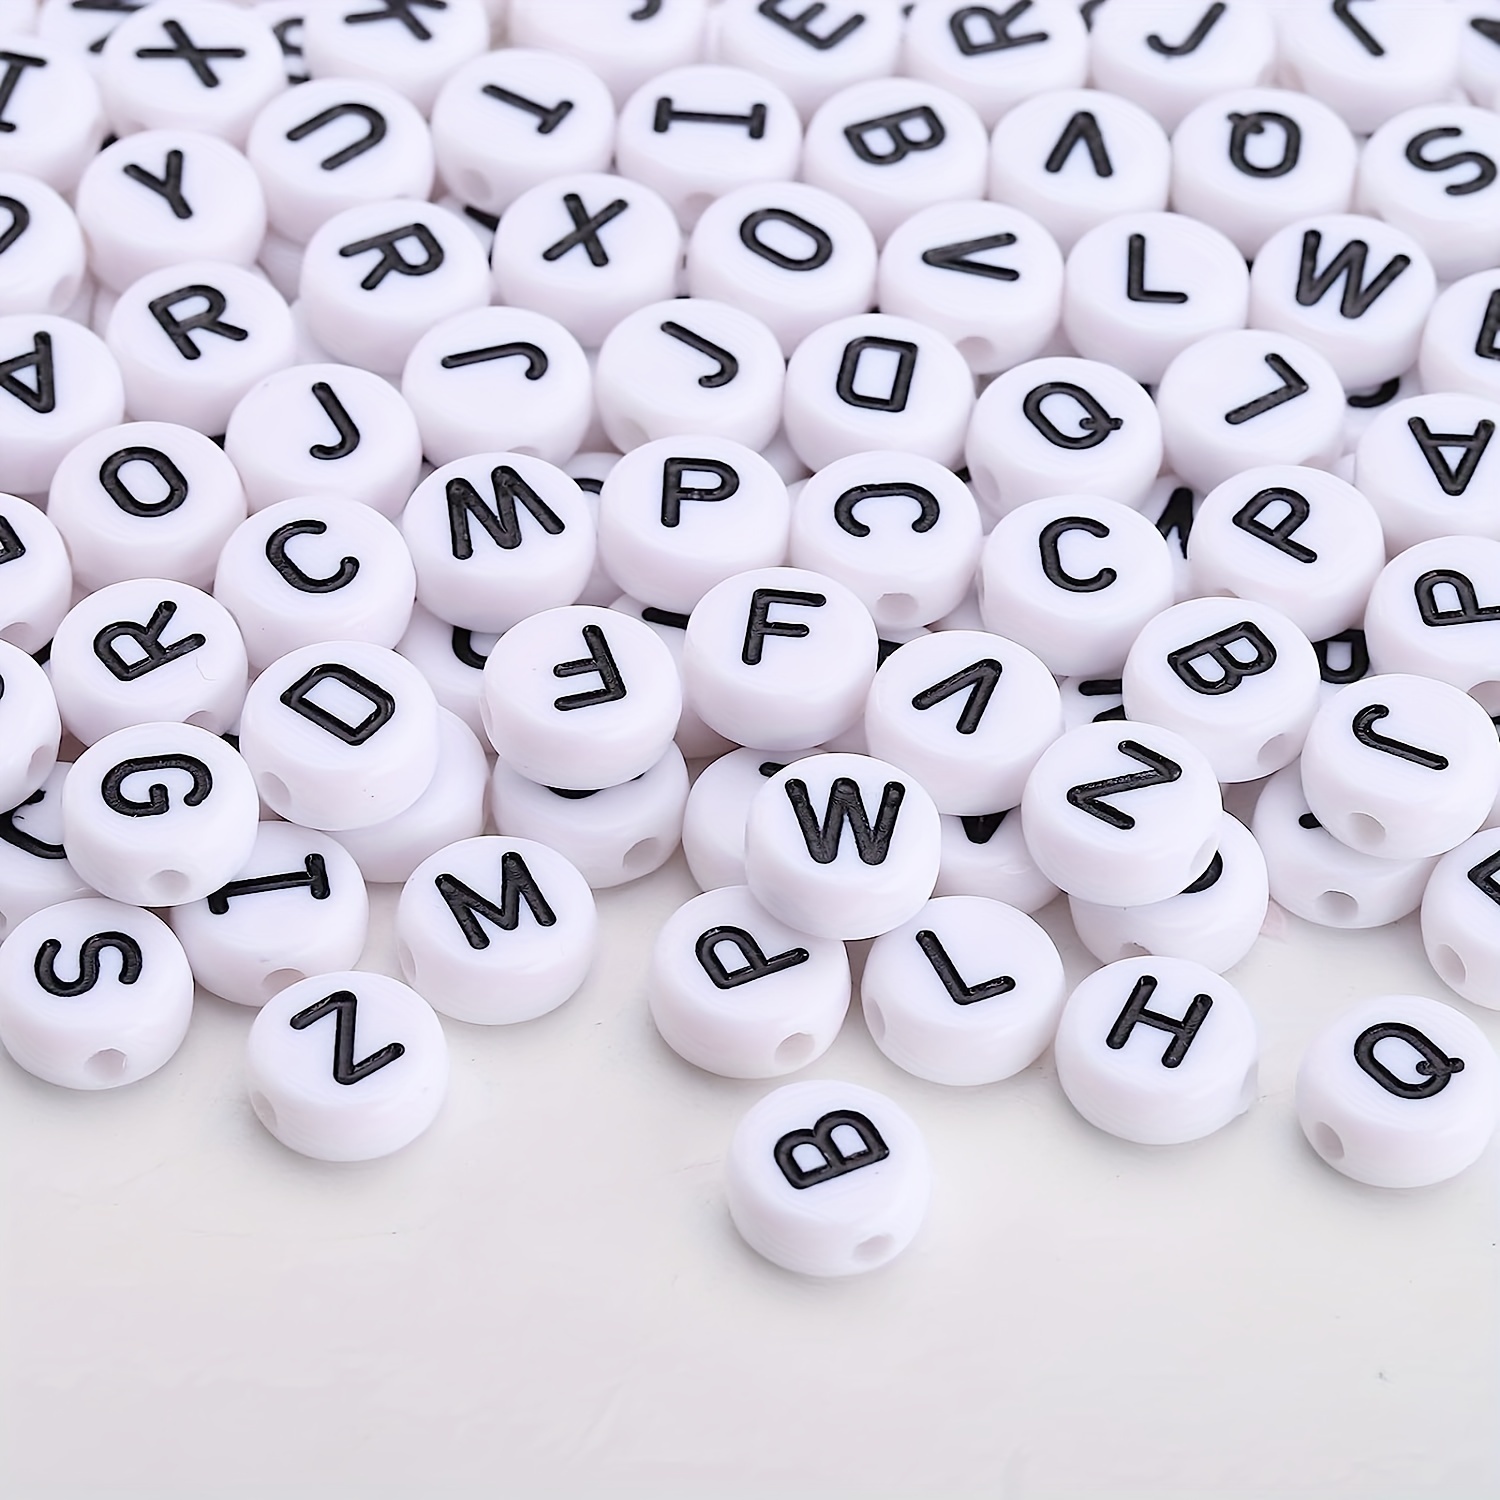 White Opaque 7mm Coin Alpha Beads - Black Number 2 (100pcs)